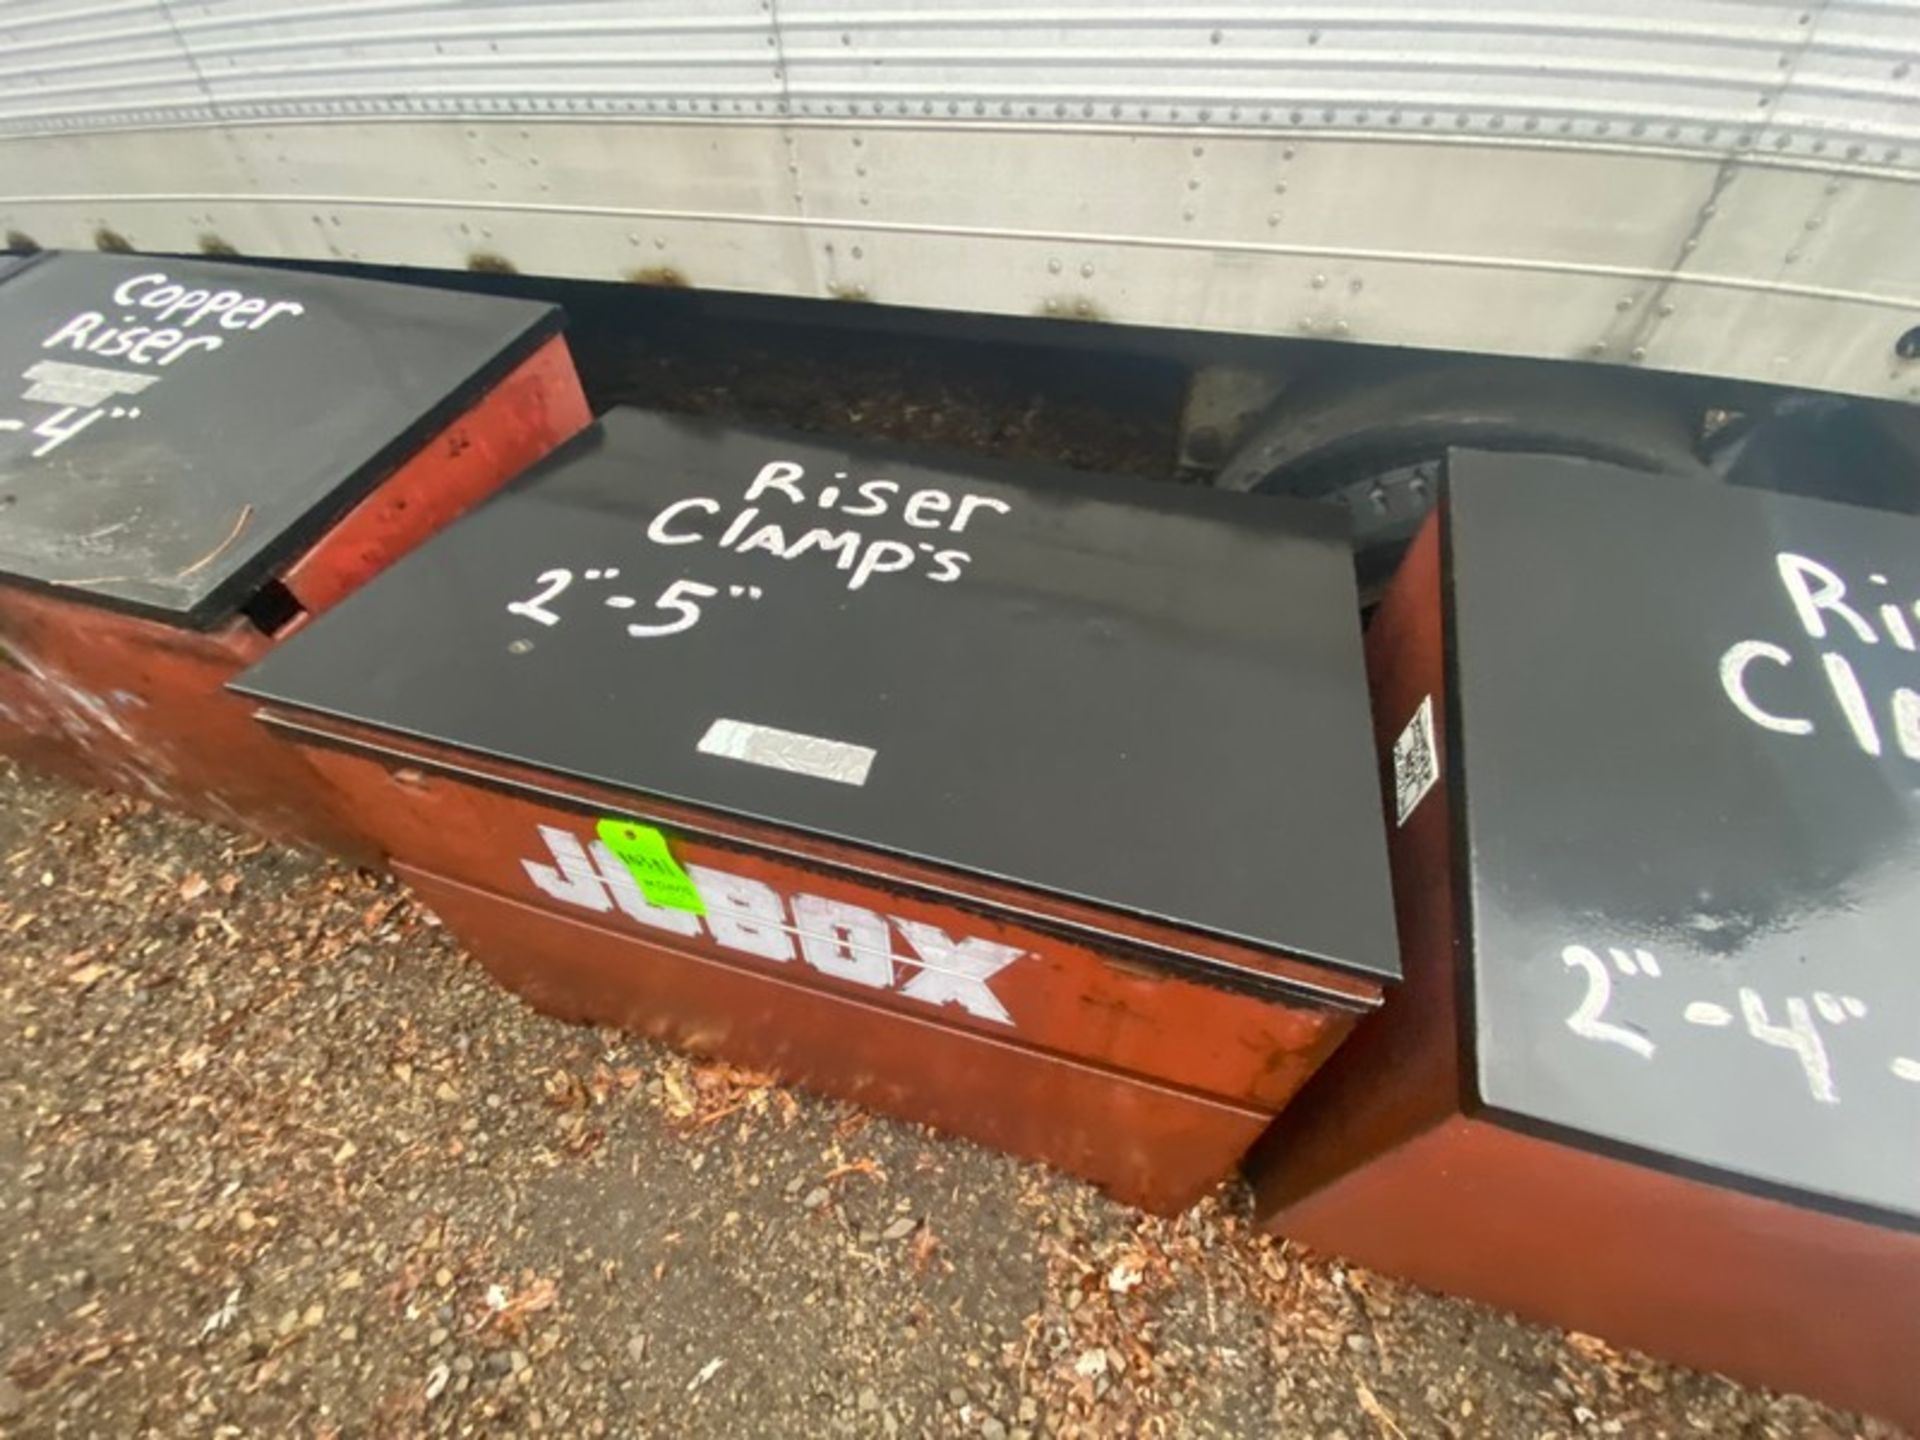 Jobox Gang Box, with Hinge Lid, Overall Dims.: Aprox. 50” L x 32” W x 34” H, with Assorted Riser - Image 3 of 4